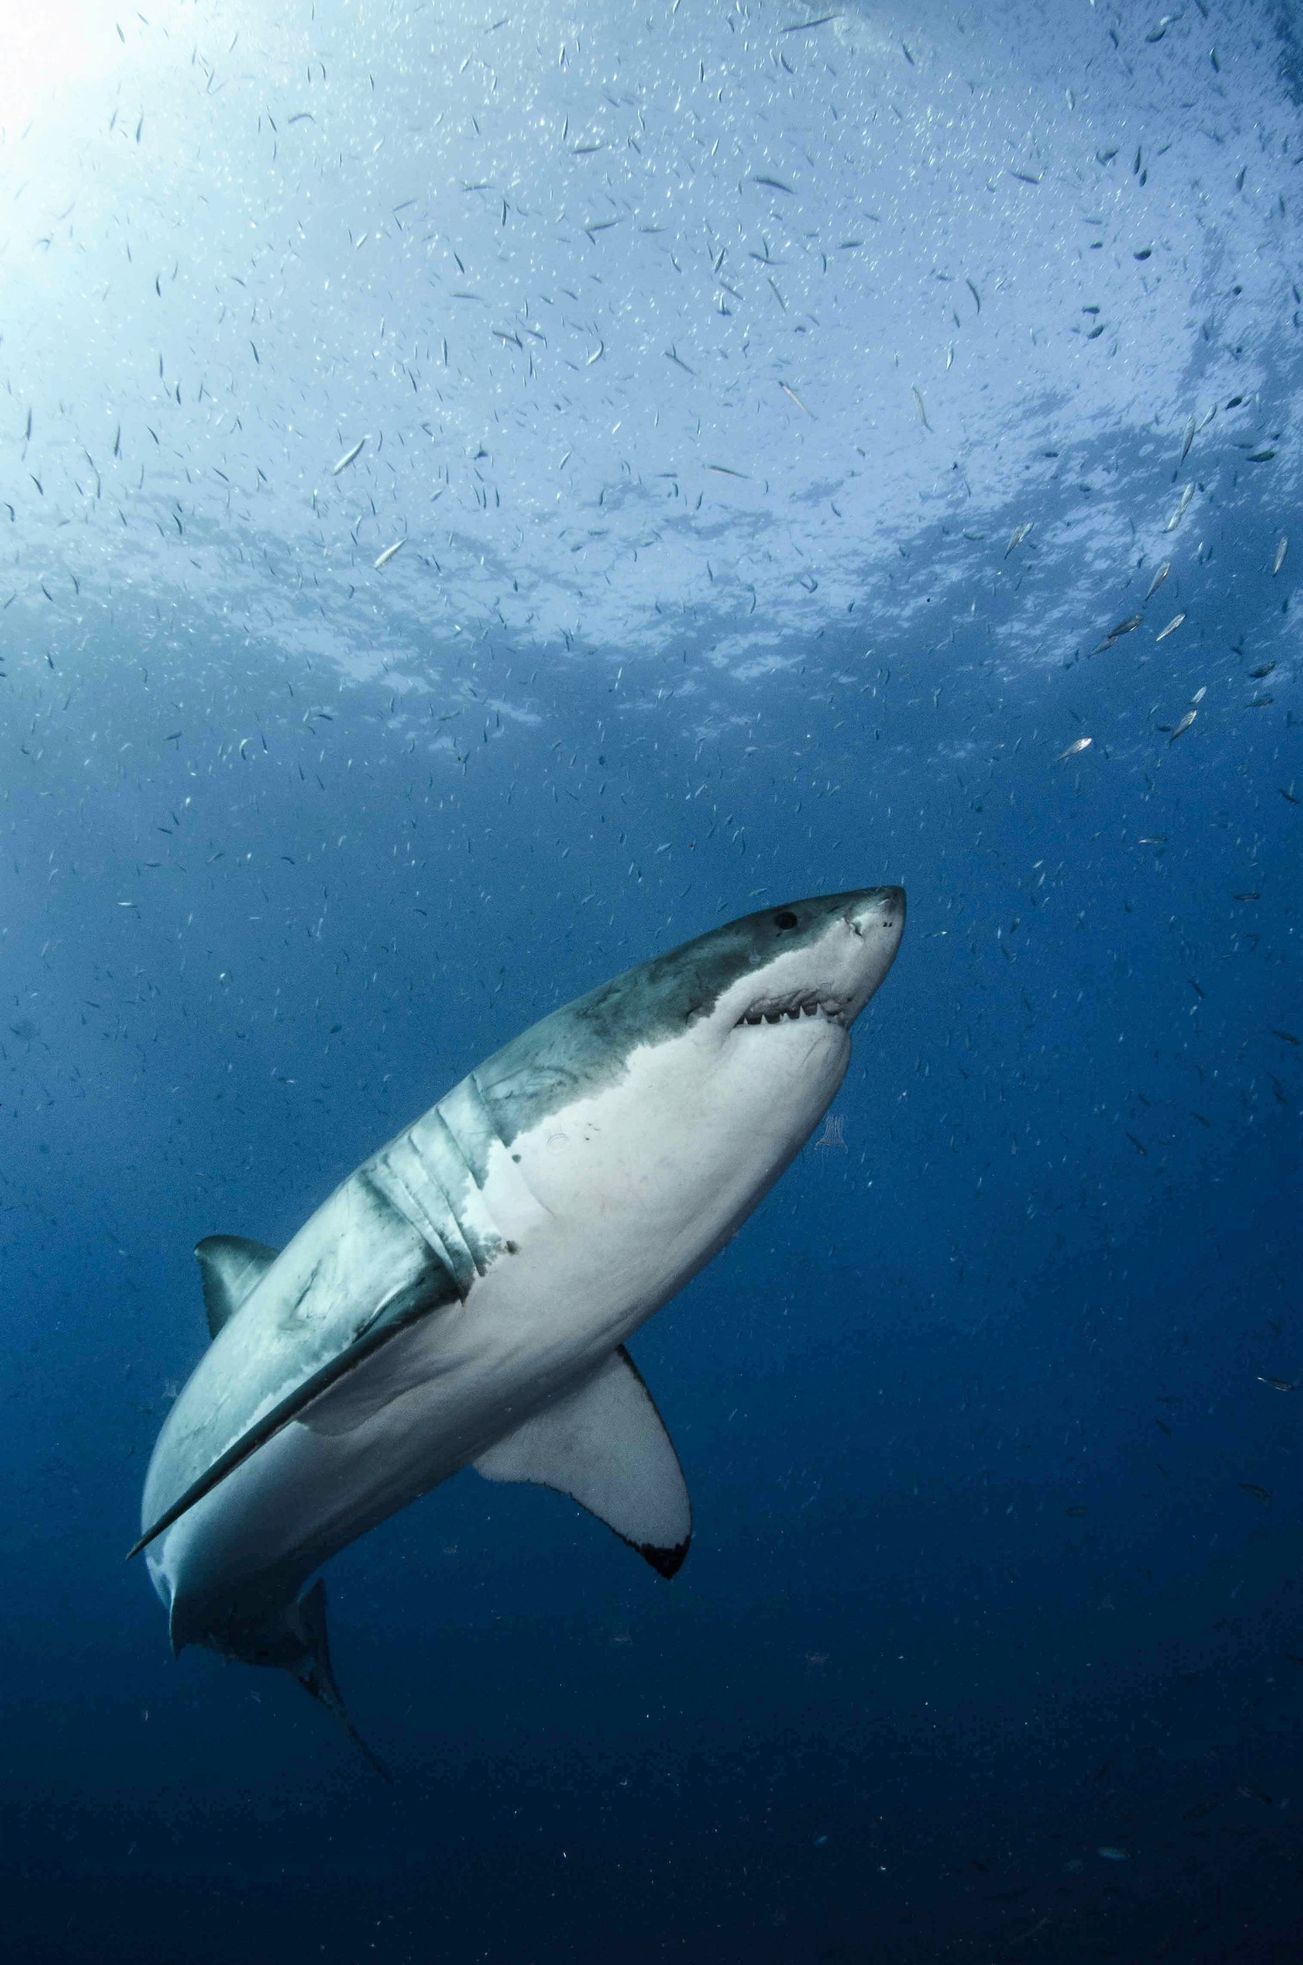 Great white shark is seen in the waters near Guadalupe Island off the coast of Mexico